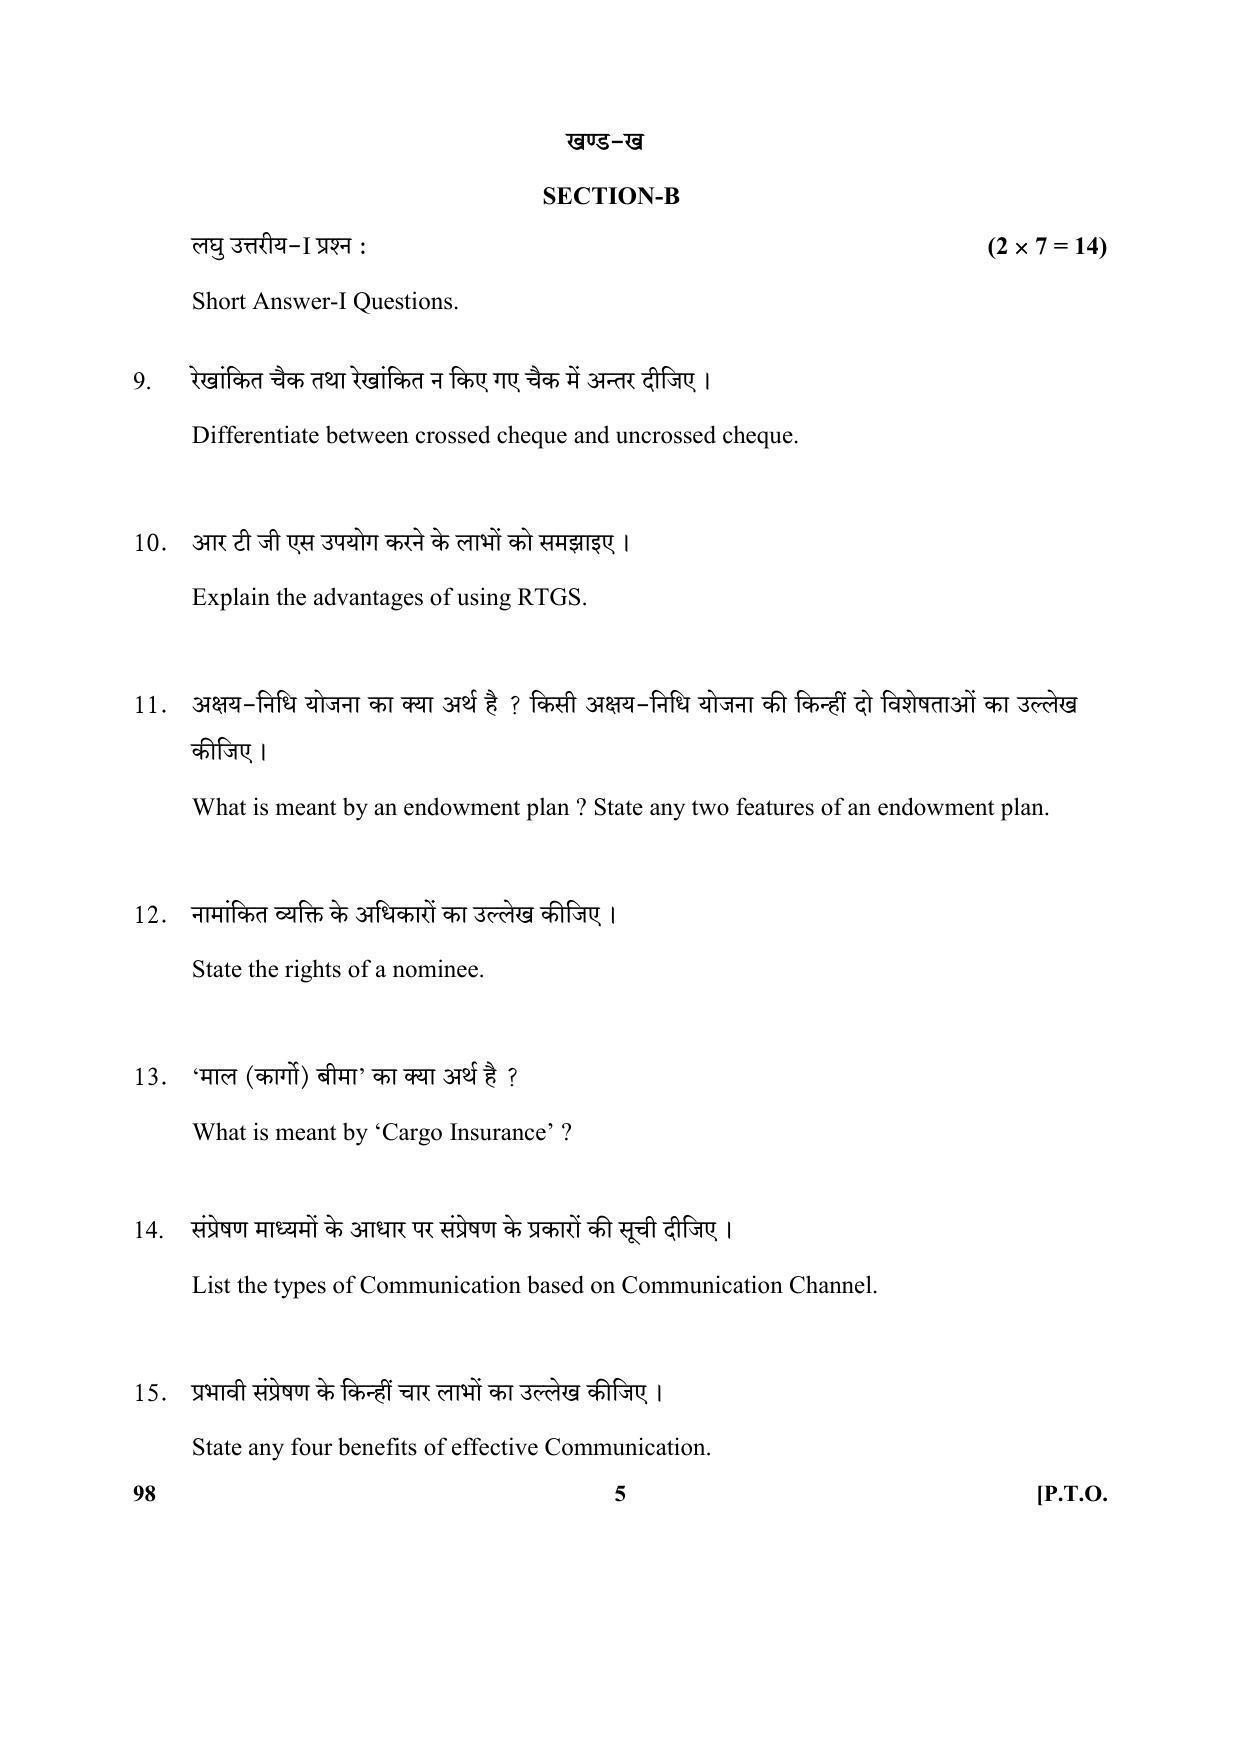 CBSE Class 10 98 (Banking & Insurance) 2018 Question Paper - Page 5